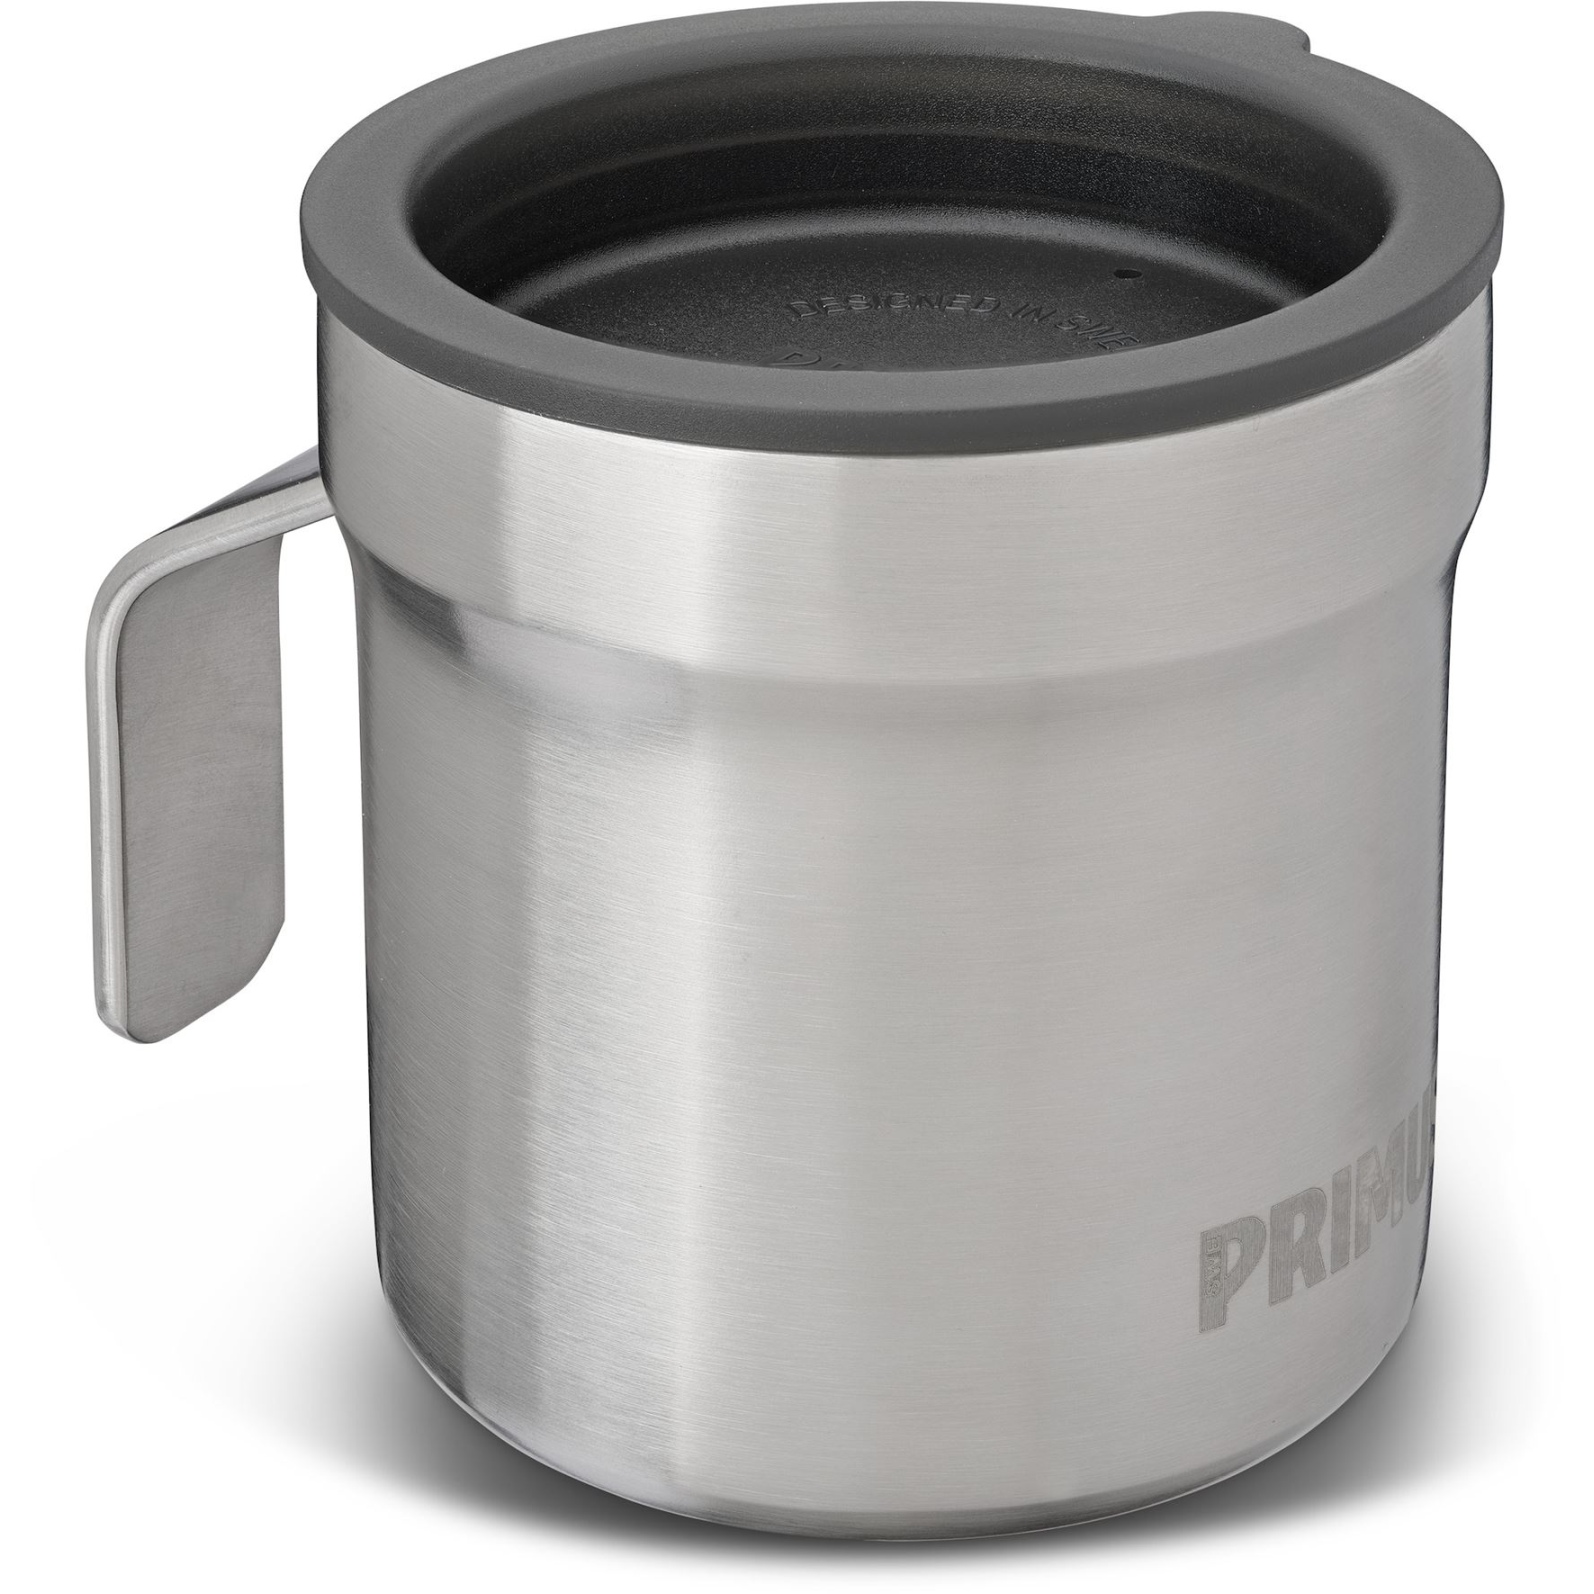 Picture of Primus Koppen Mug - 0.2 L - stainless